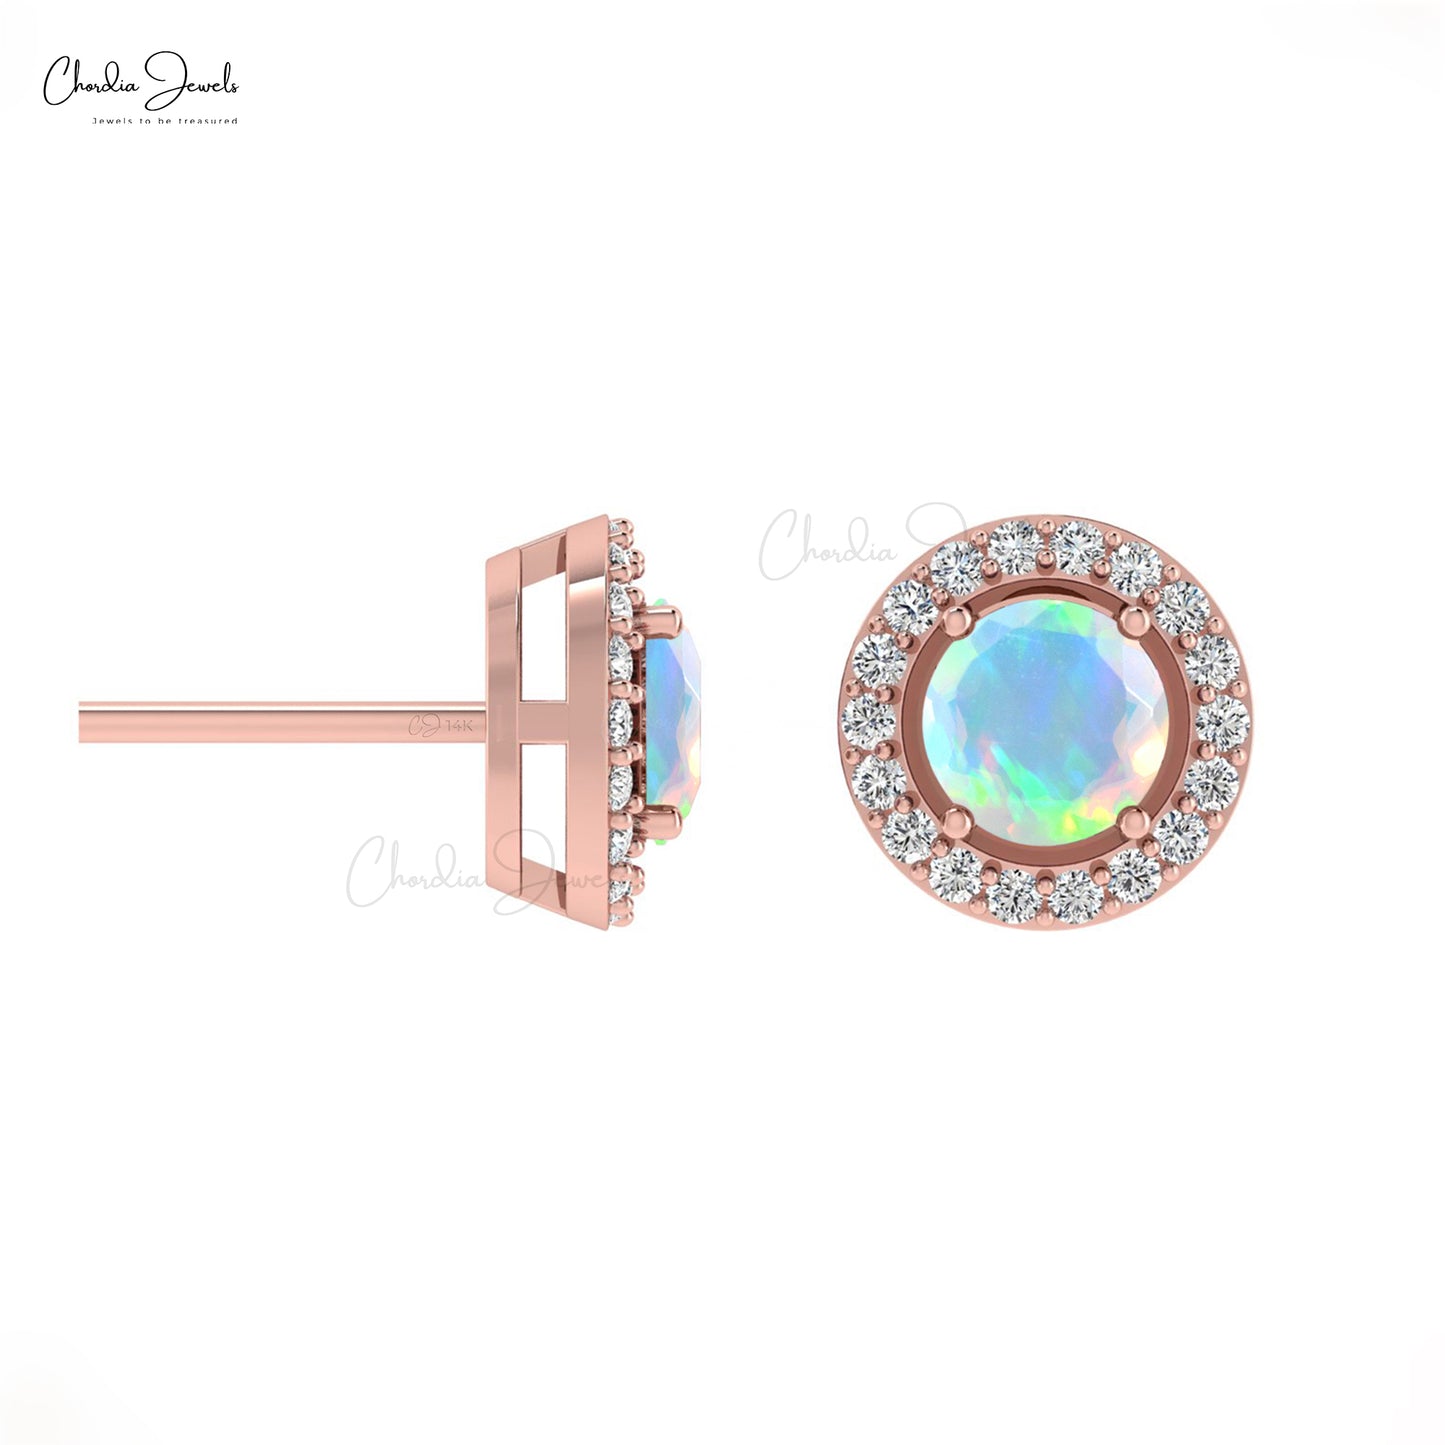 Authentic Opal & Round Diamond Halo Earrings In 14K Gold For Women